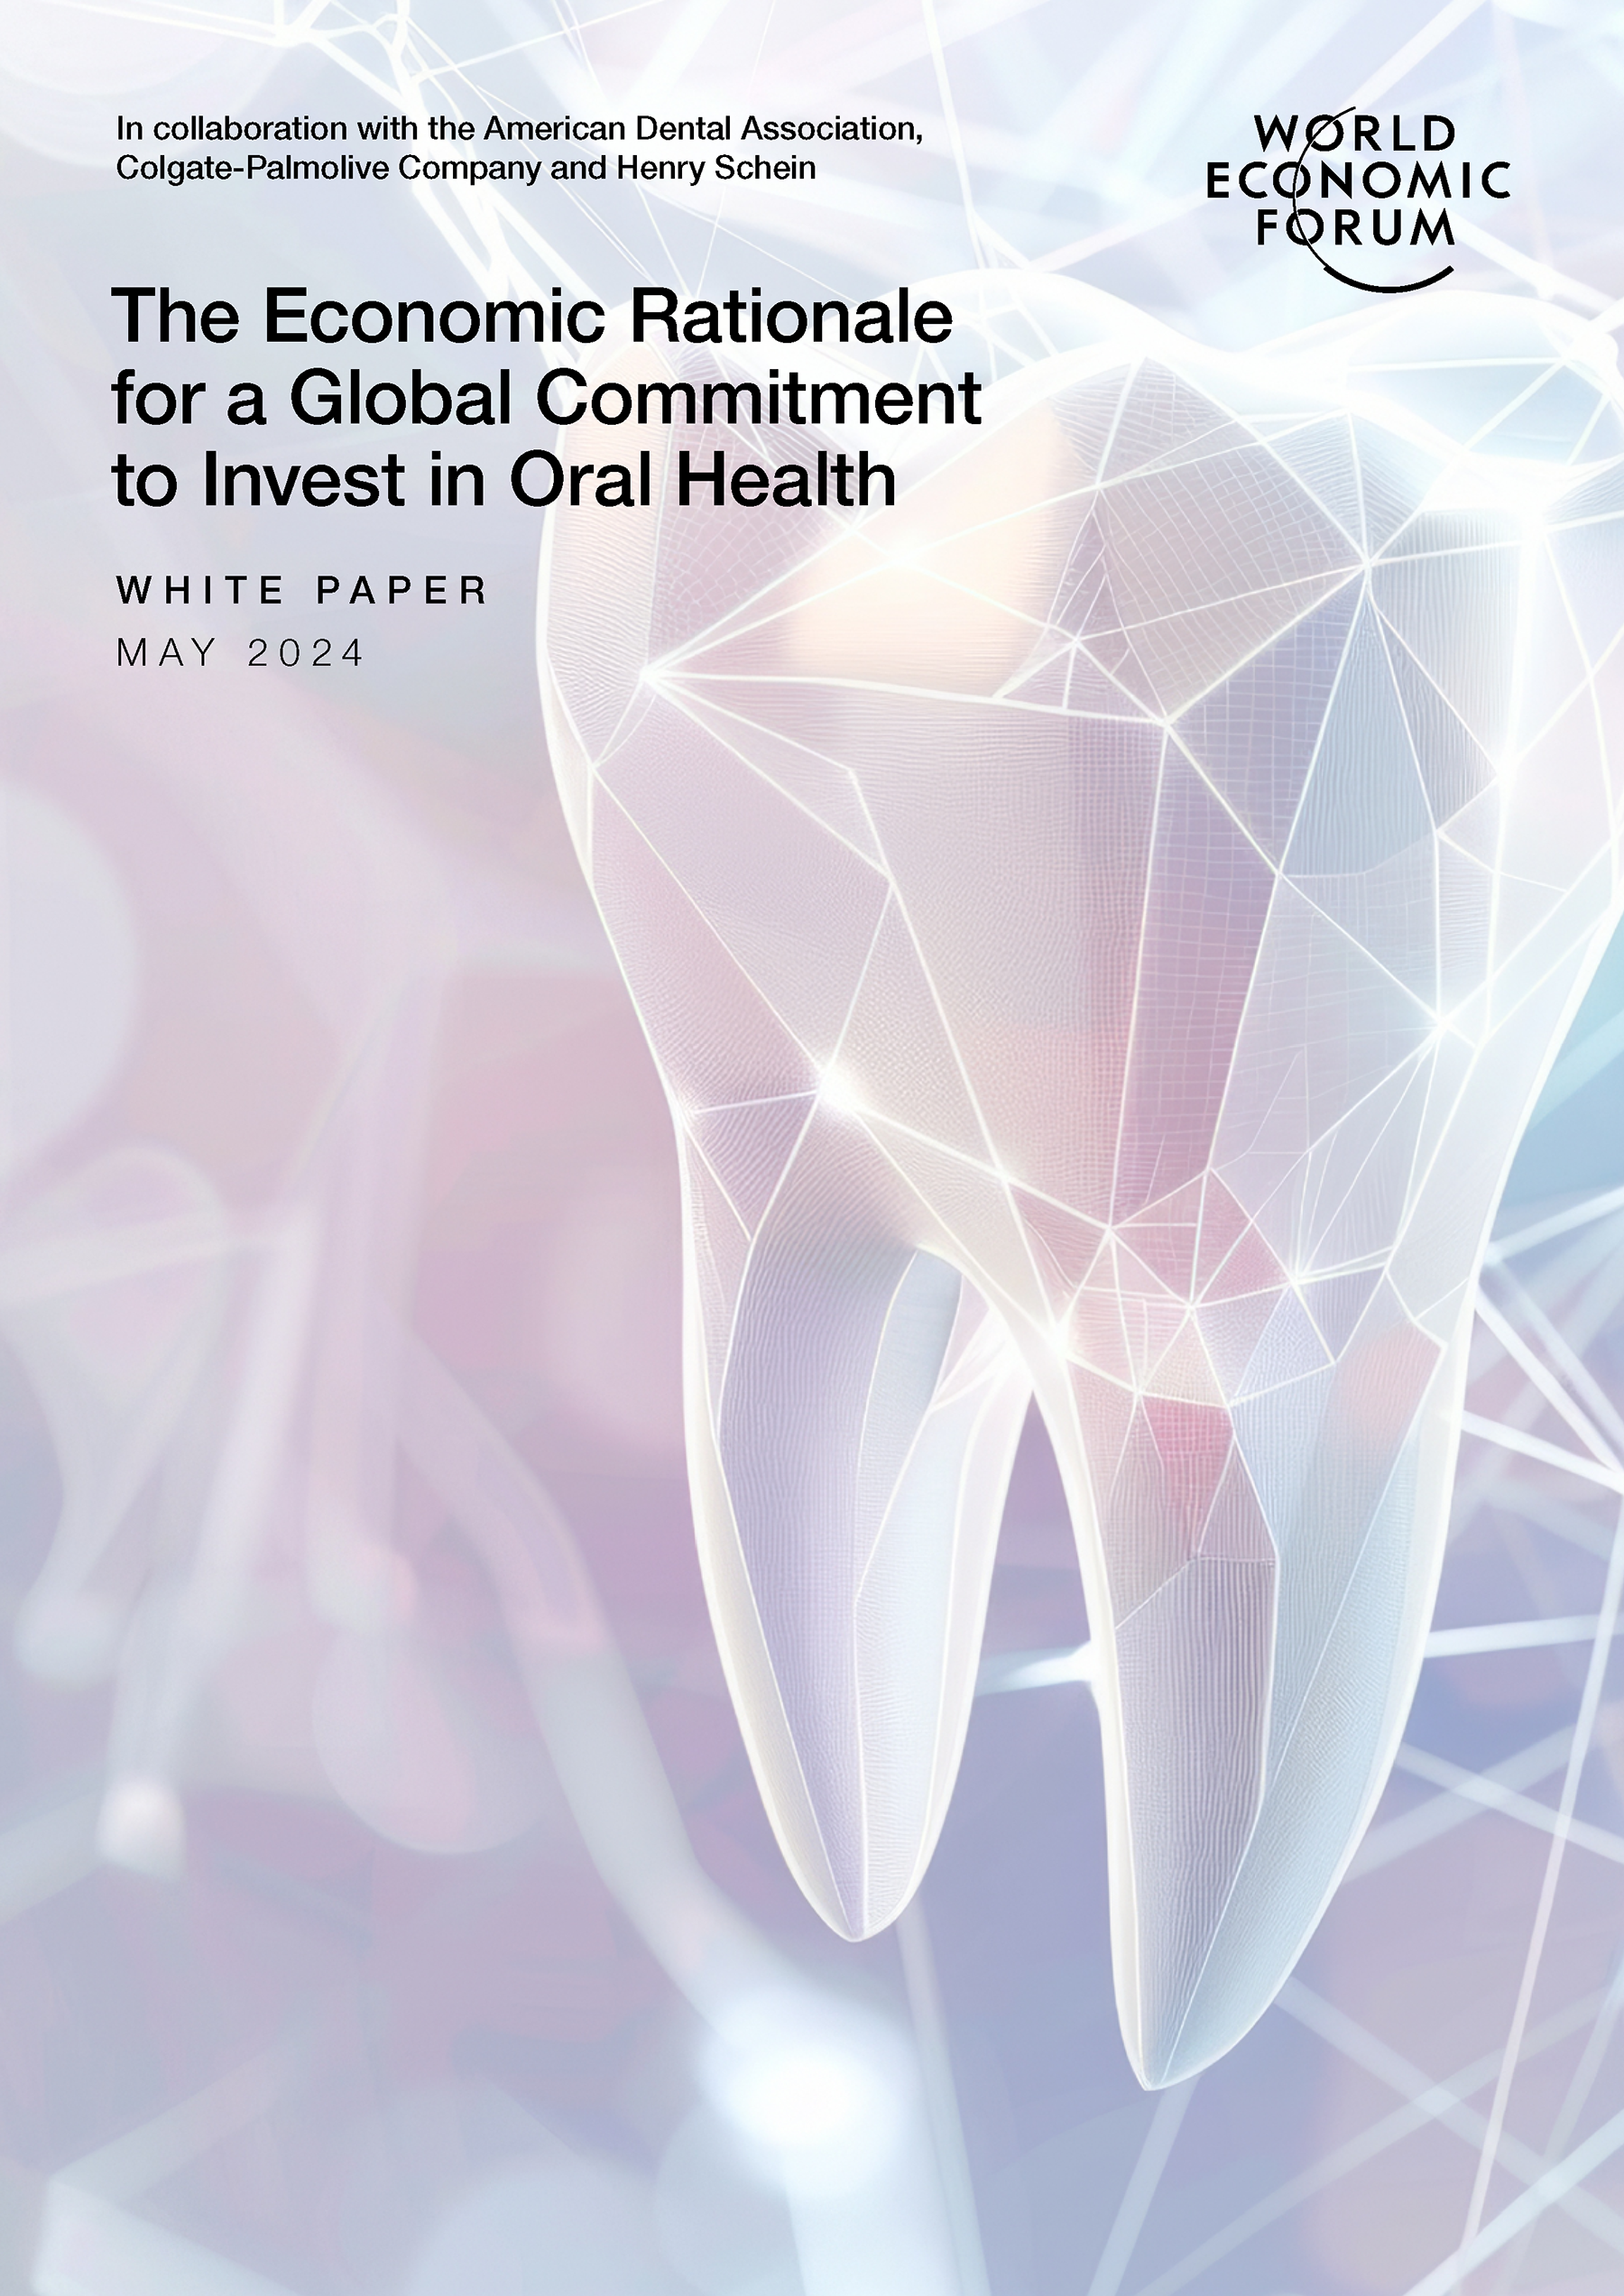 New Study Says Increased Oral Health Investment Helps Overall Health and the Economy | Image Credit: © World Economic Forum